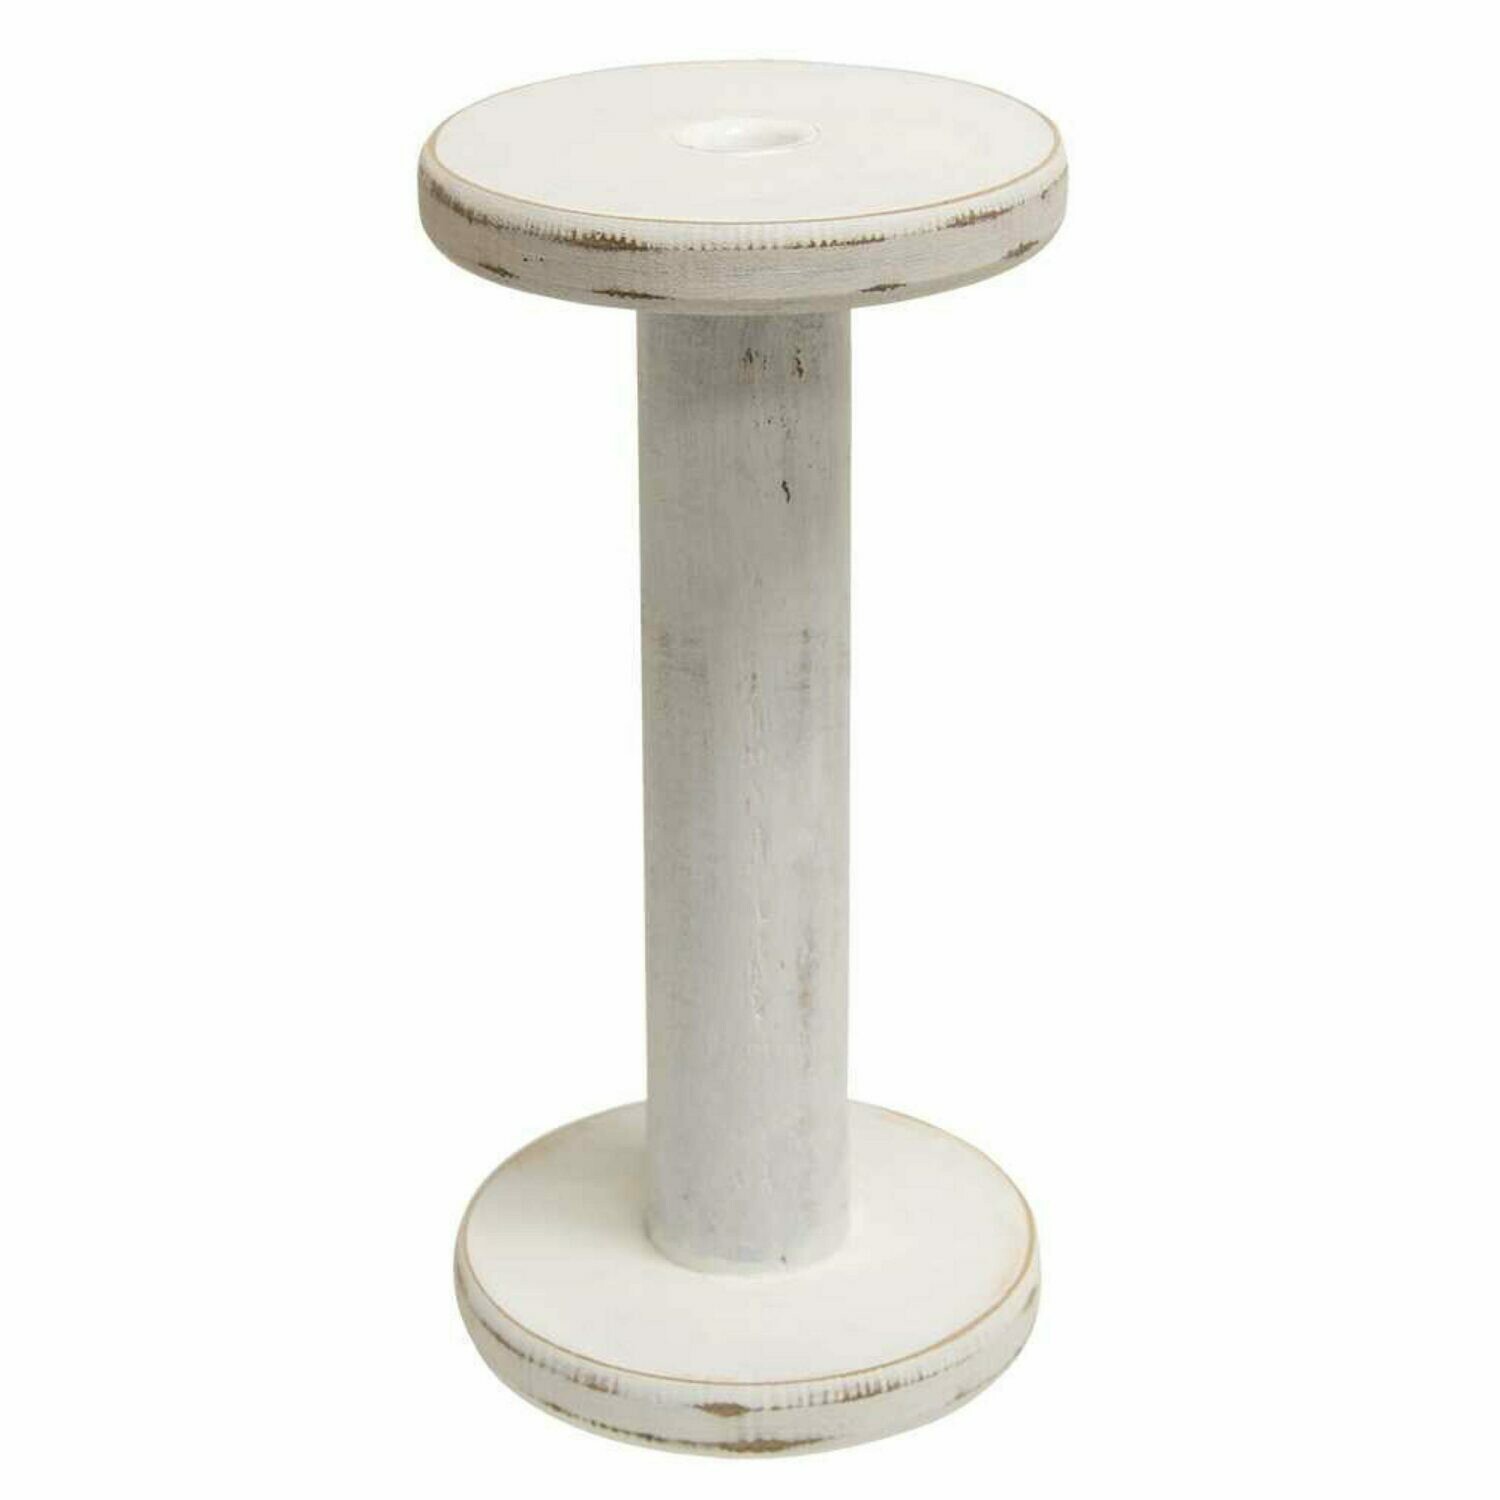 Distressed White Spool Candle Holder, 9.5 inches